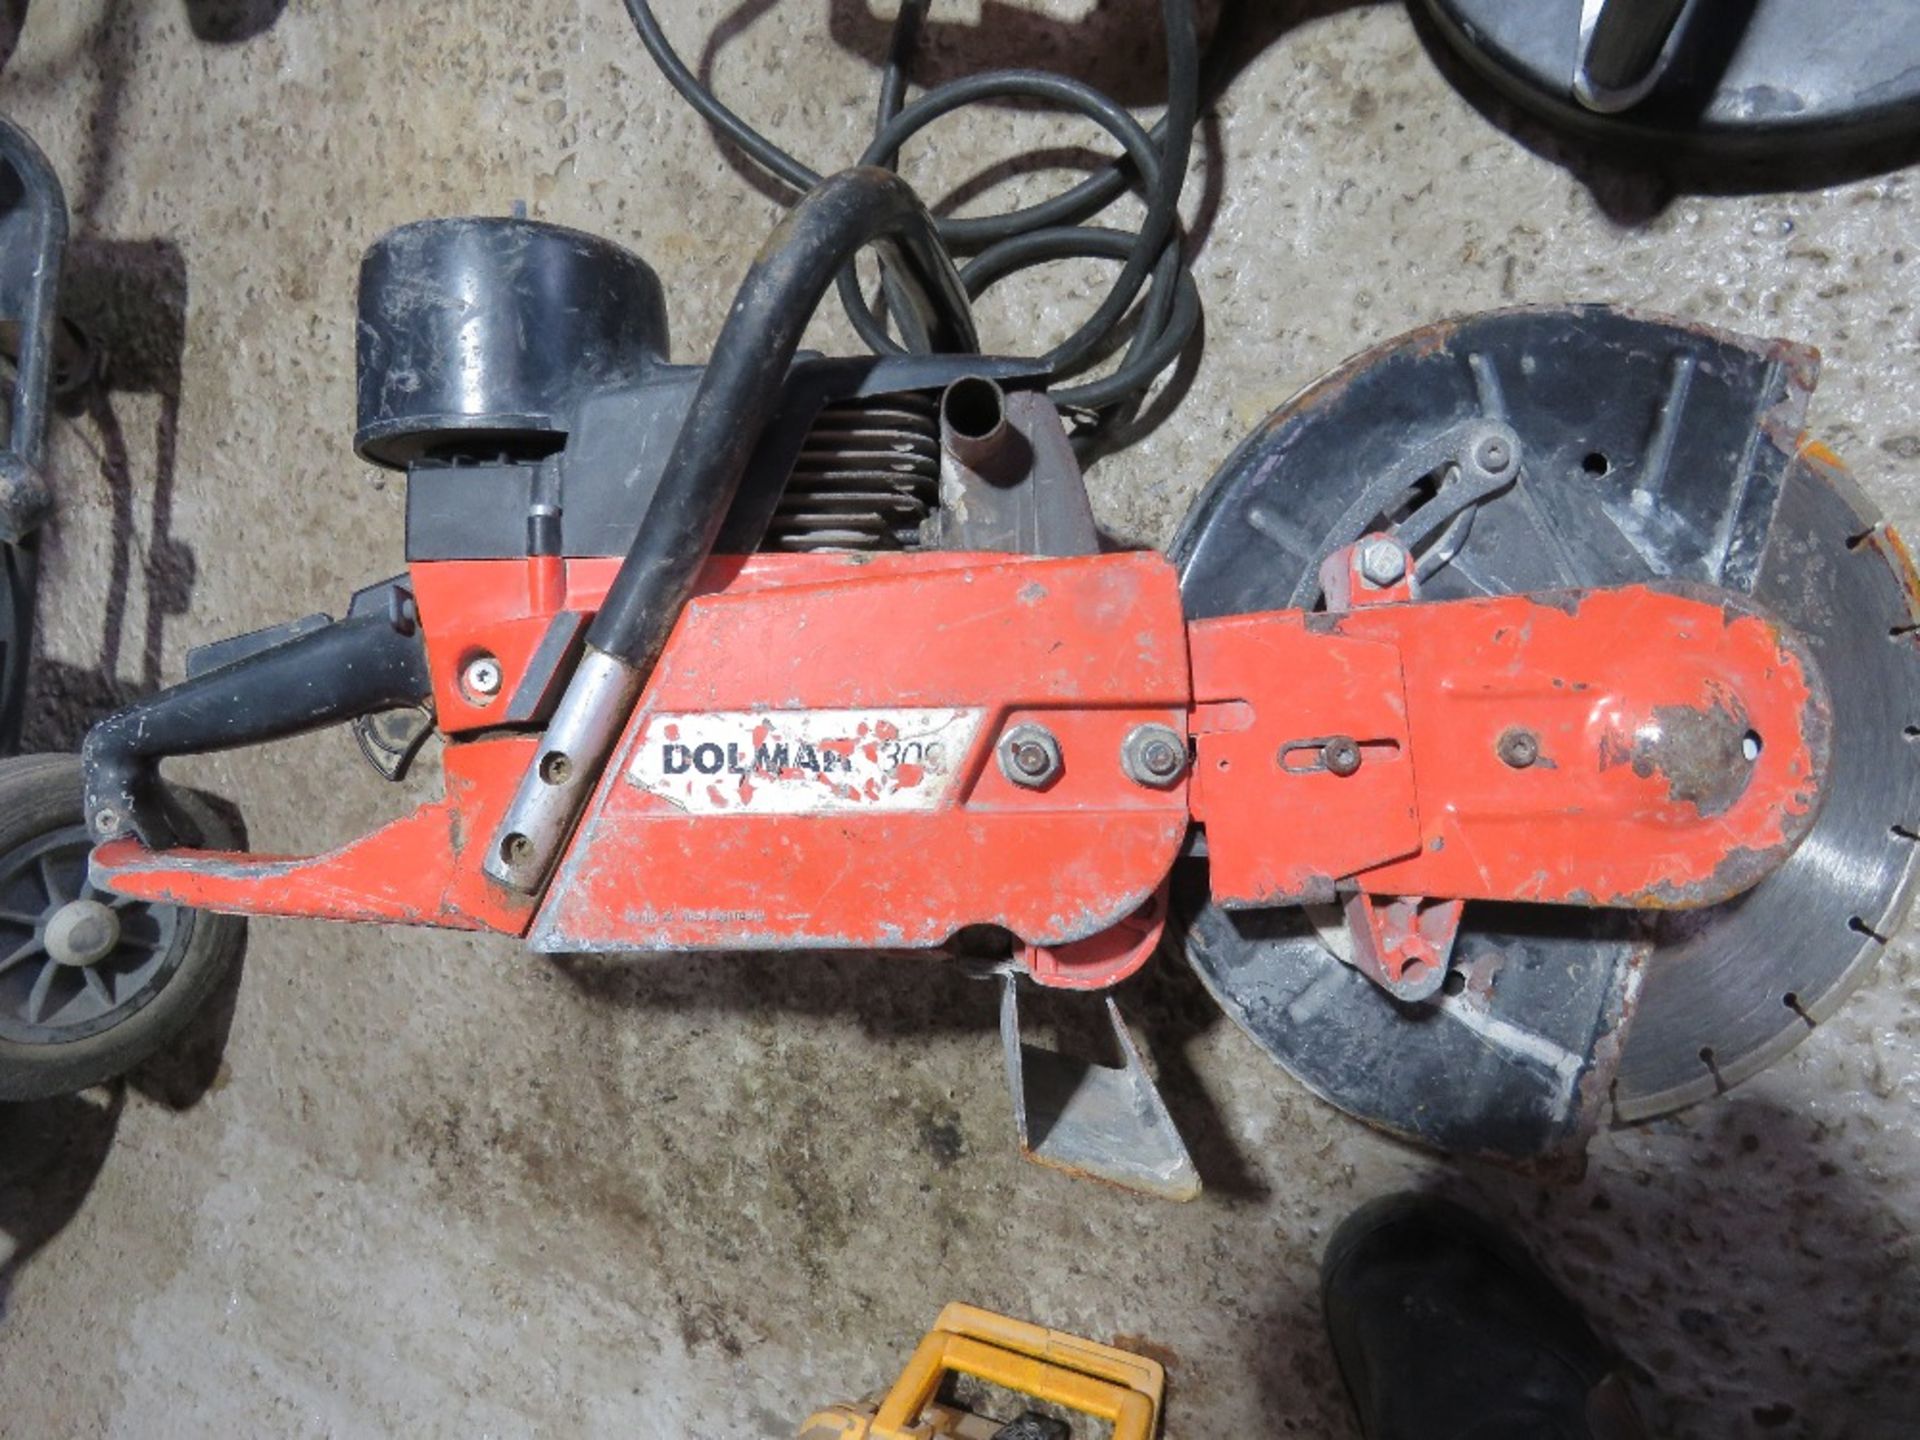 DOLMAR PETROL SAW WITH A BLADE. THIS LOT IS SOLD UNDER THE AUCTIONEERS MARGIN SCHEME, THEREFORE N - Image 3 of 3